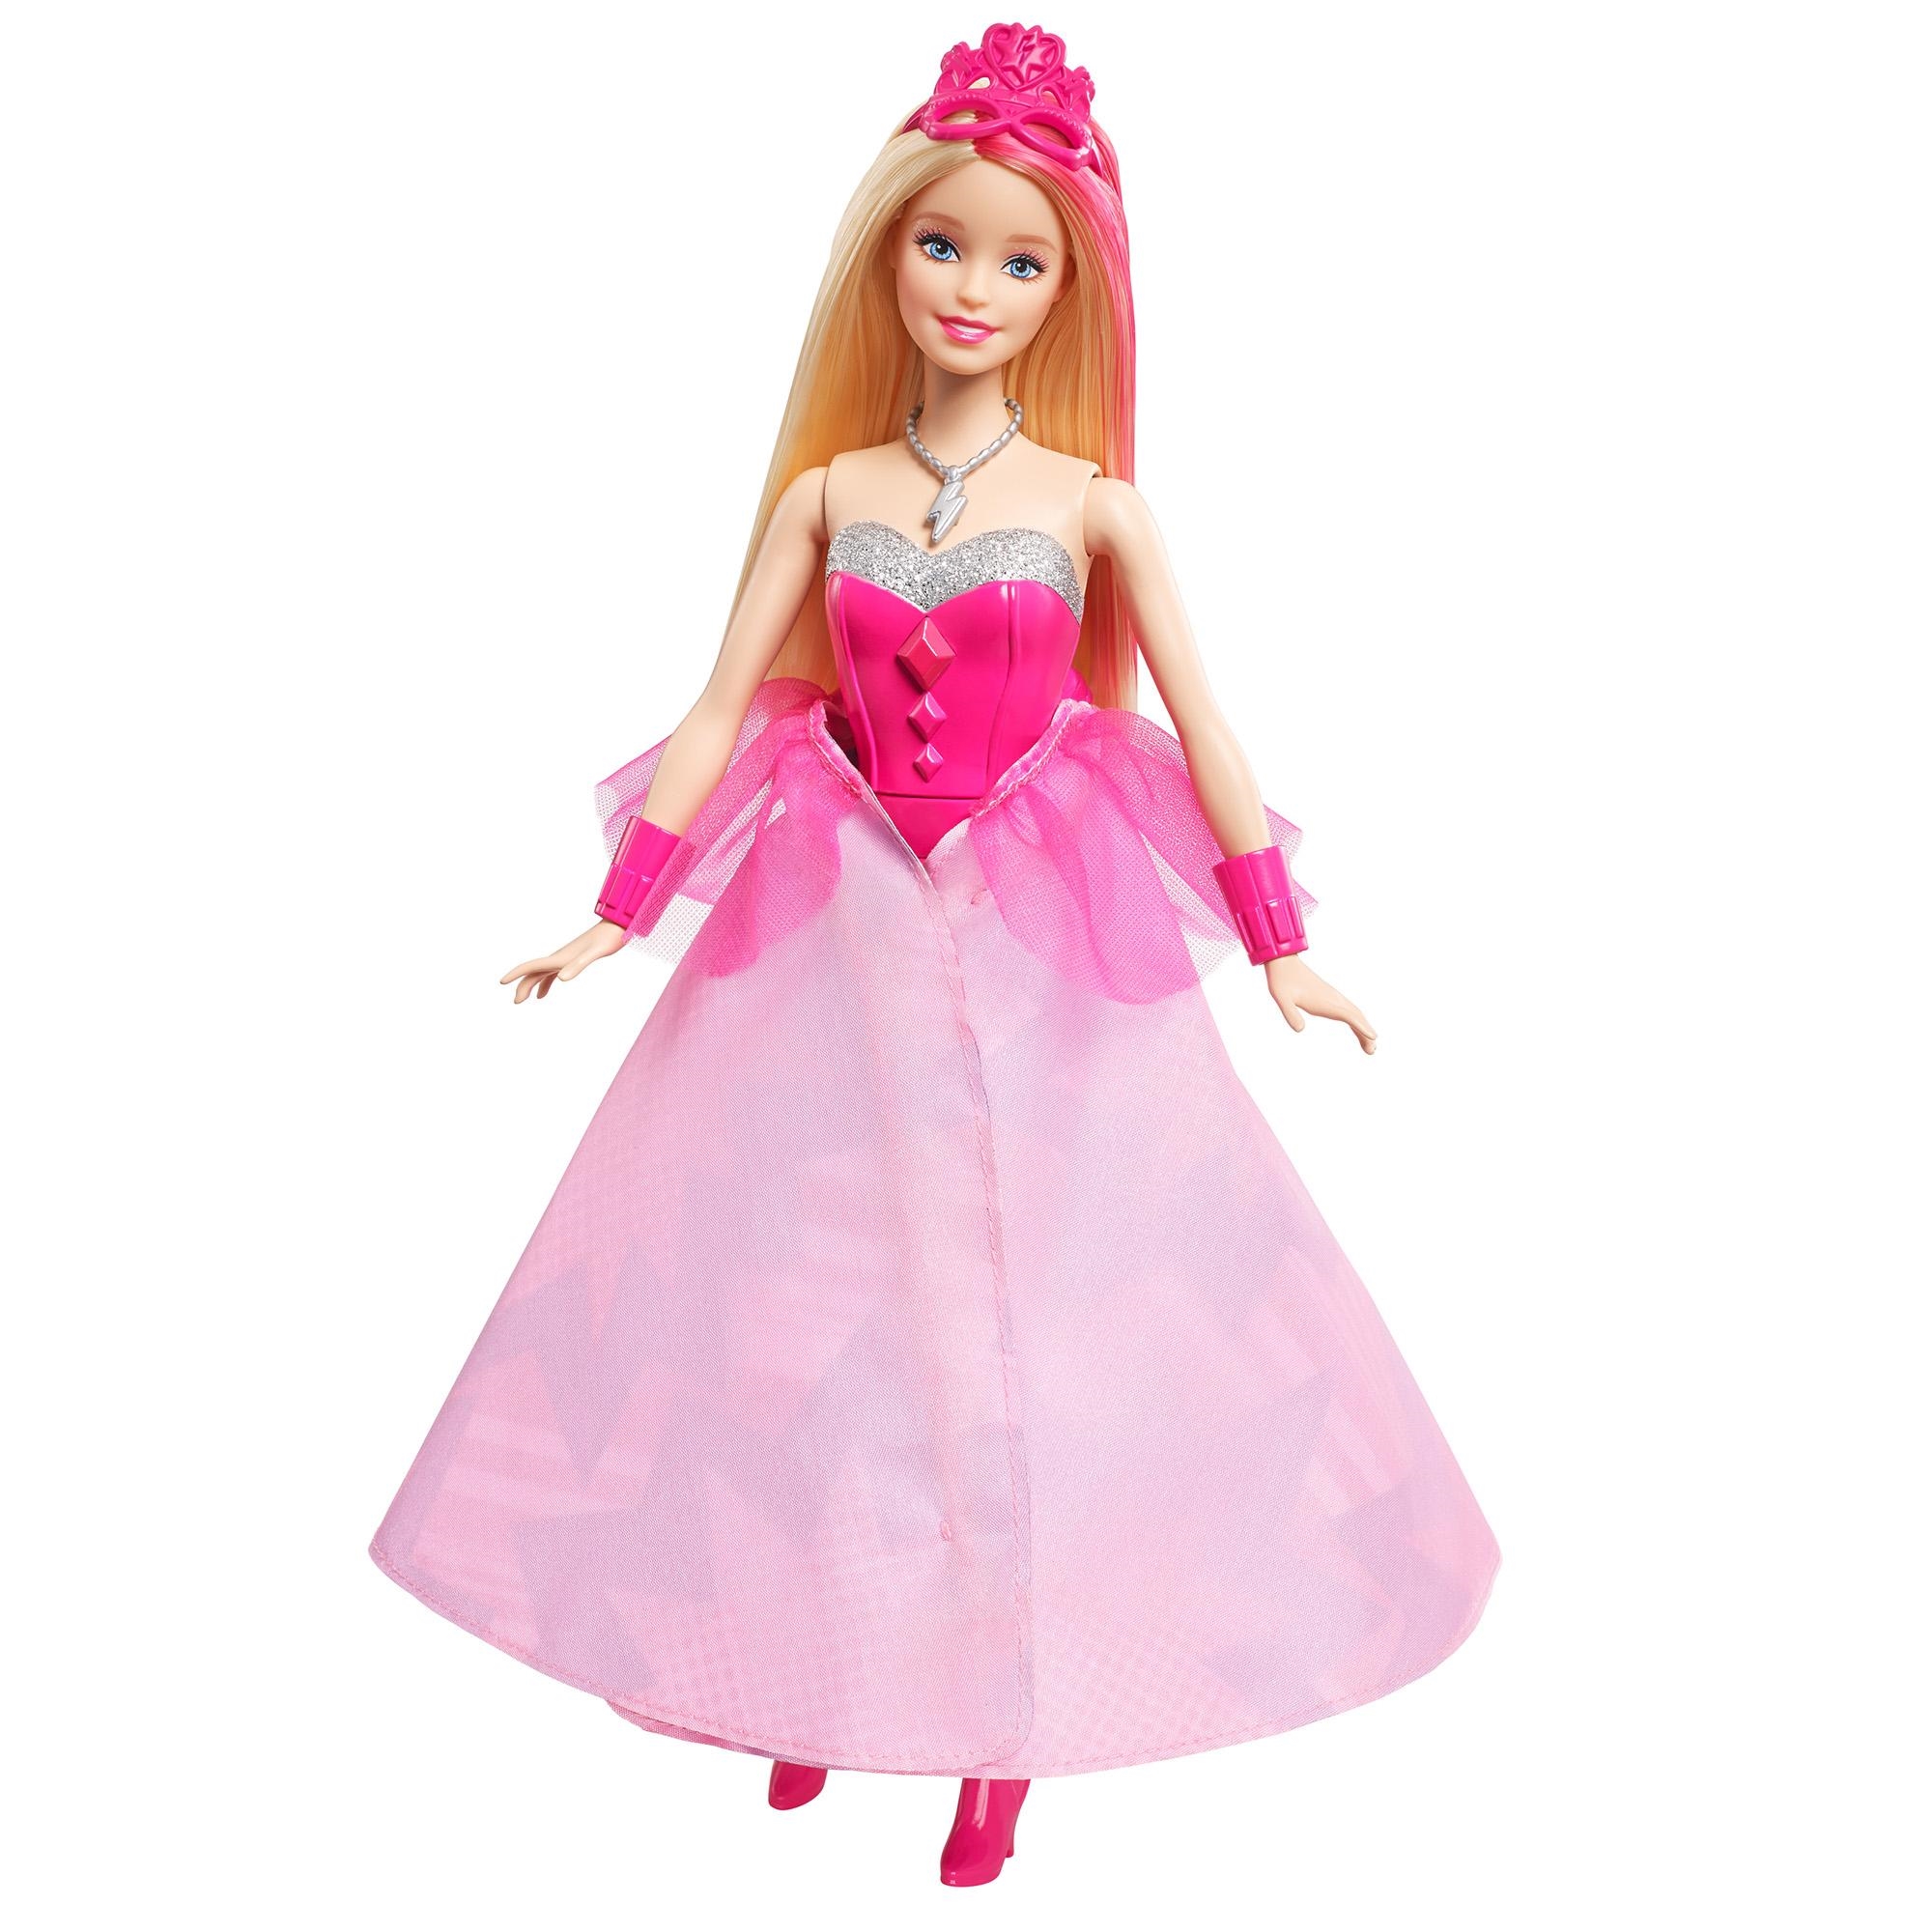 Barbie Holiday Red Doll Image